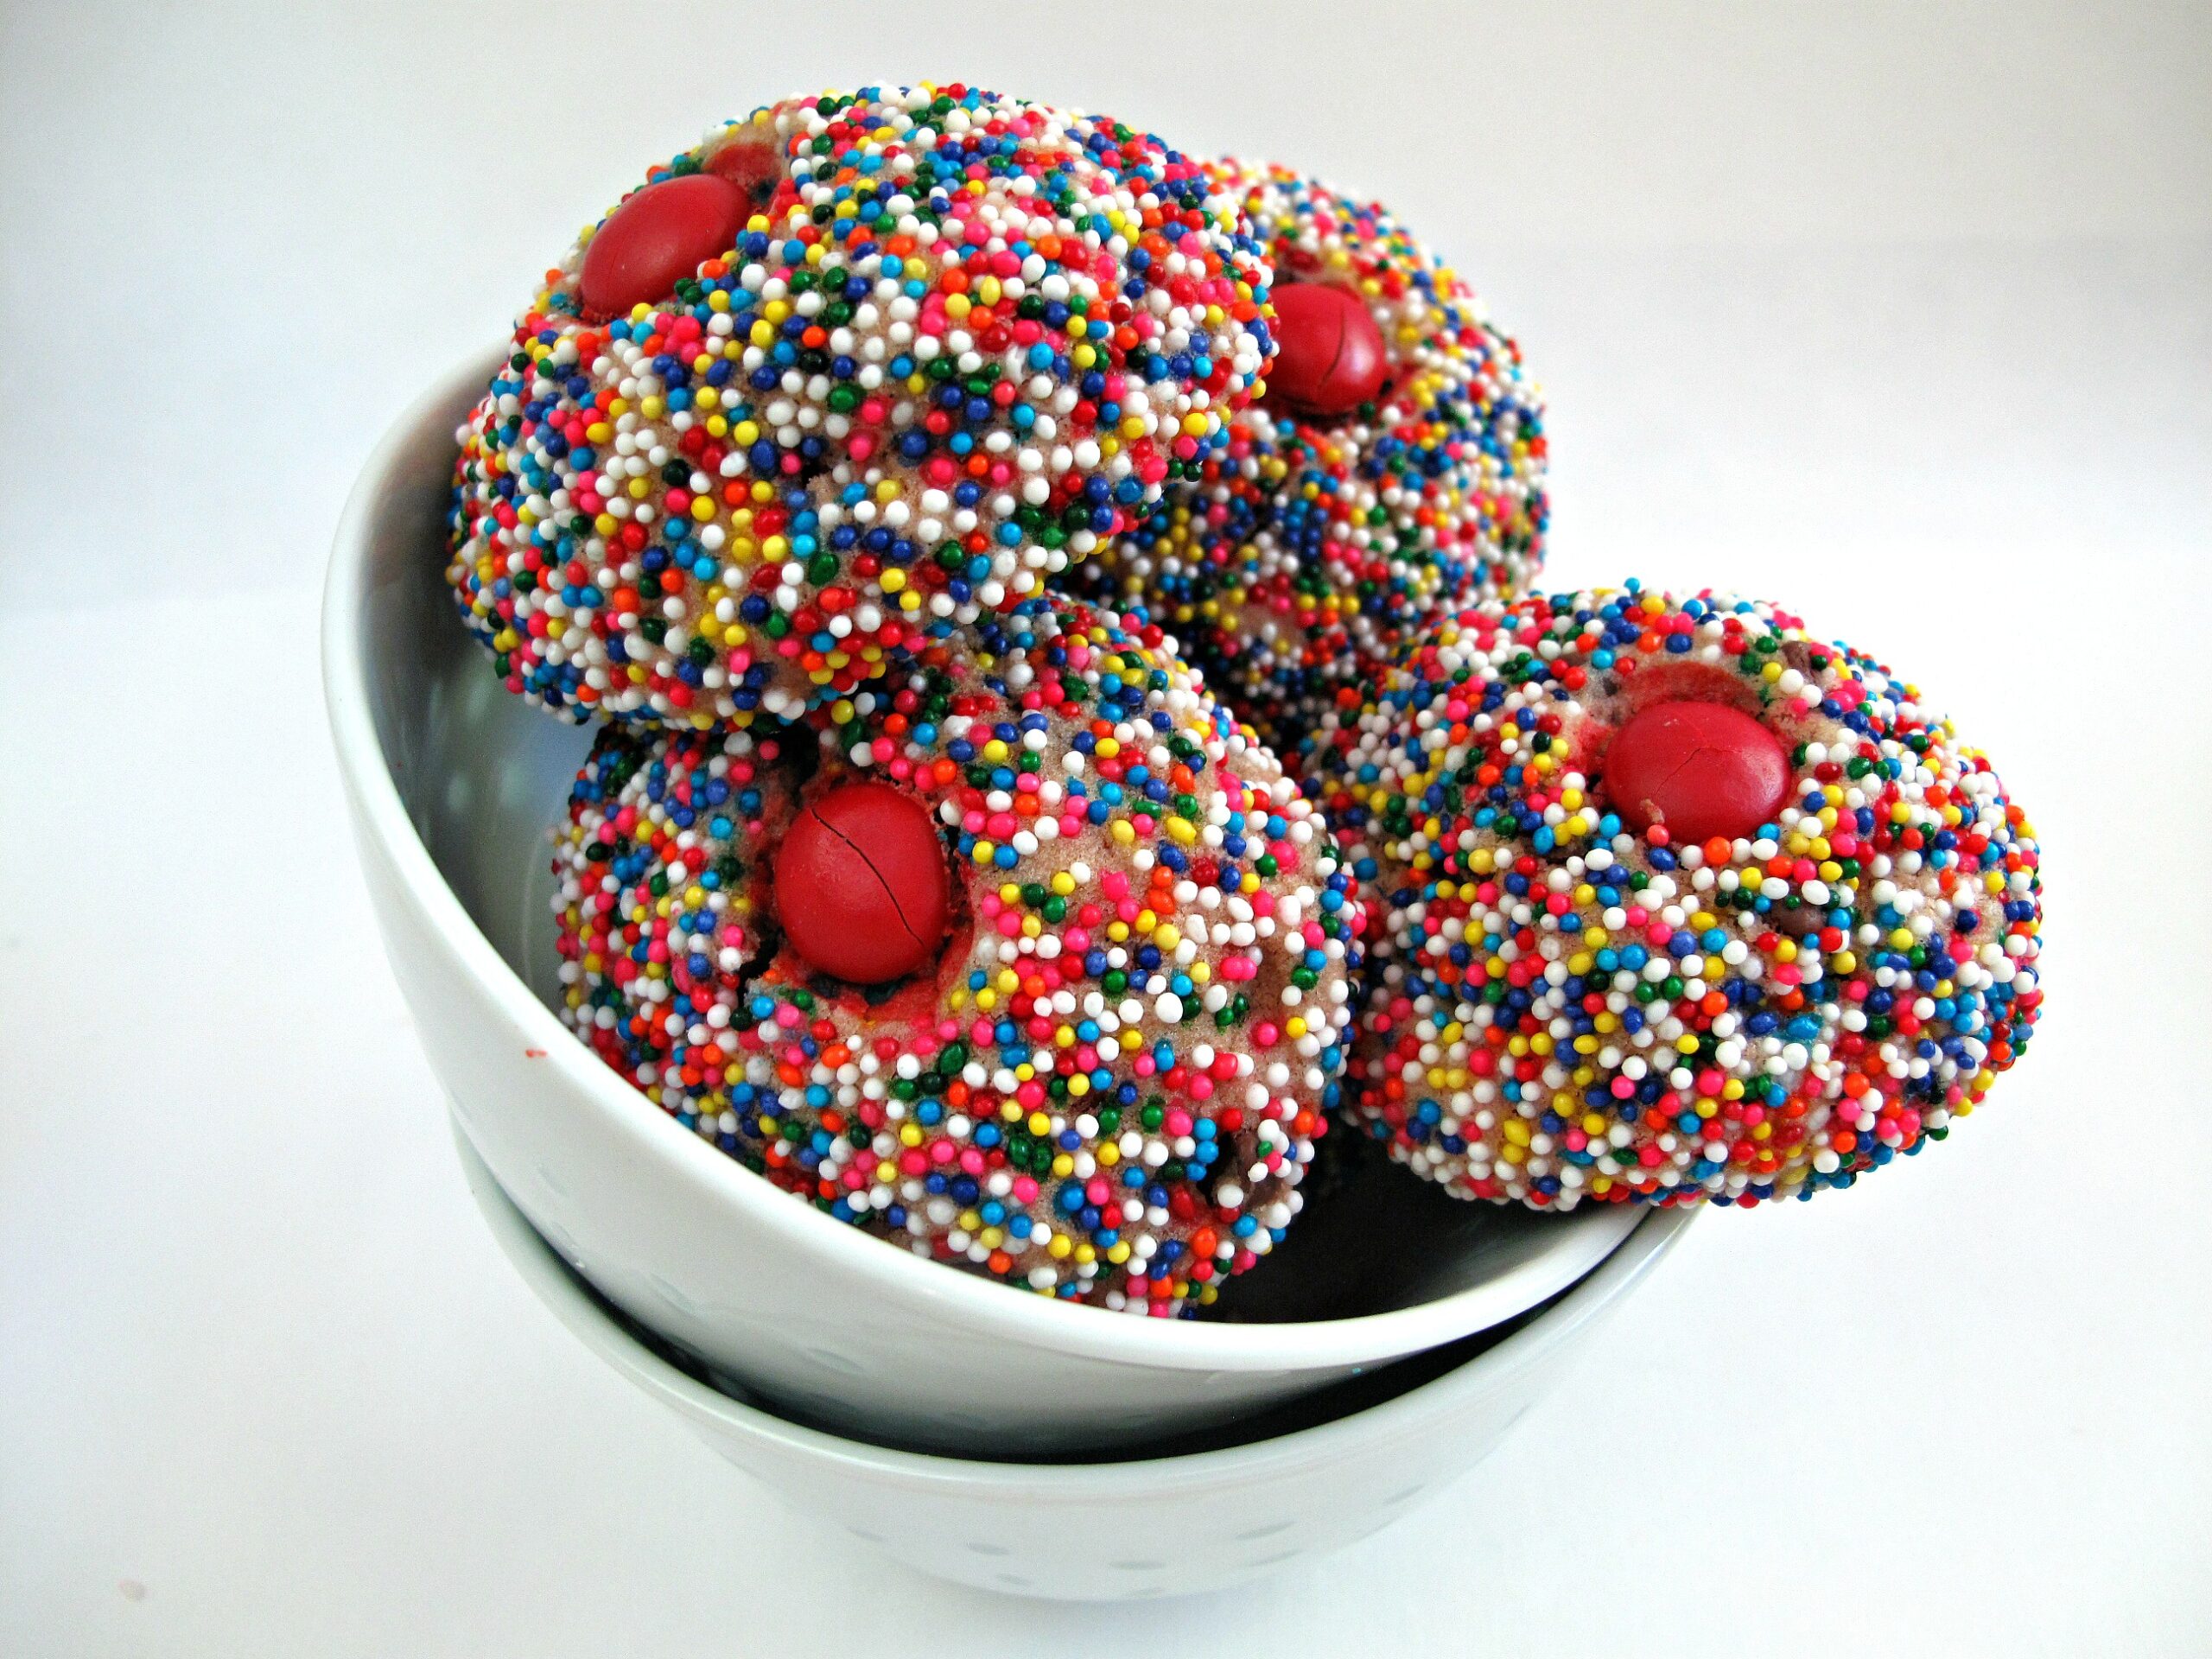 Round cookies covered in multicolored nonpareils and a red candy on top like icecream scoops.